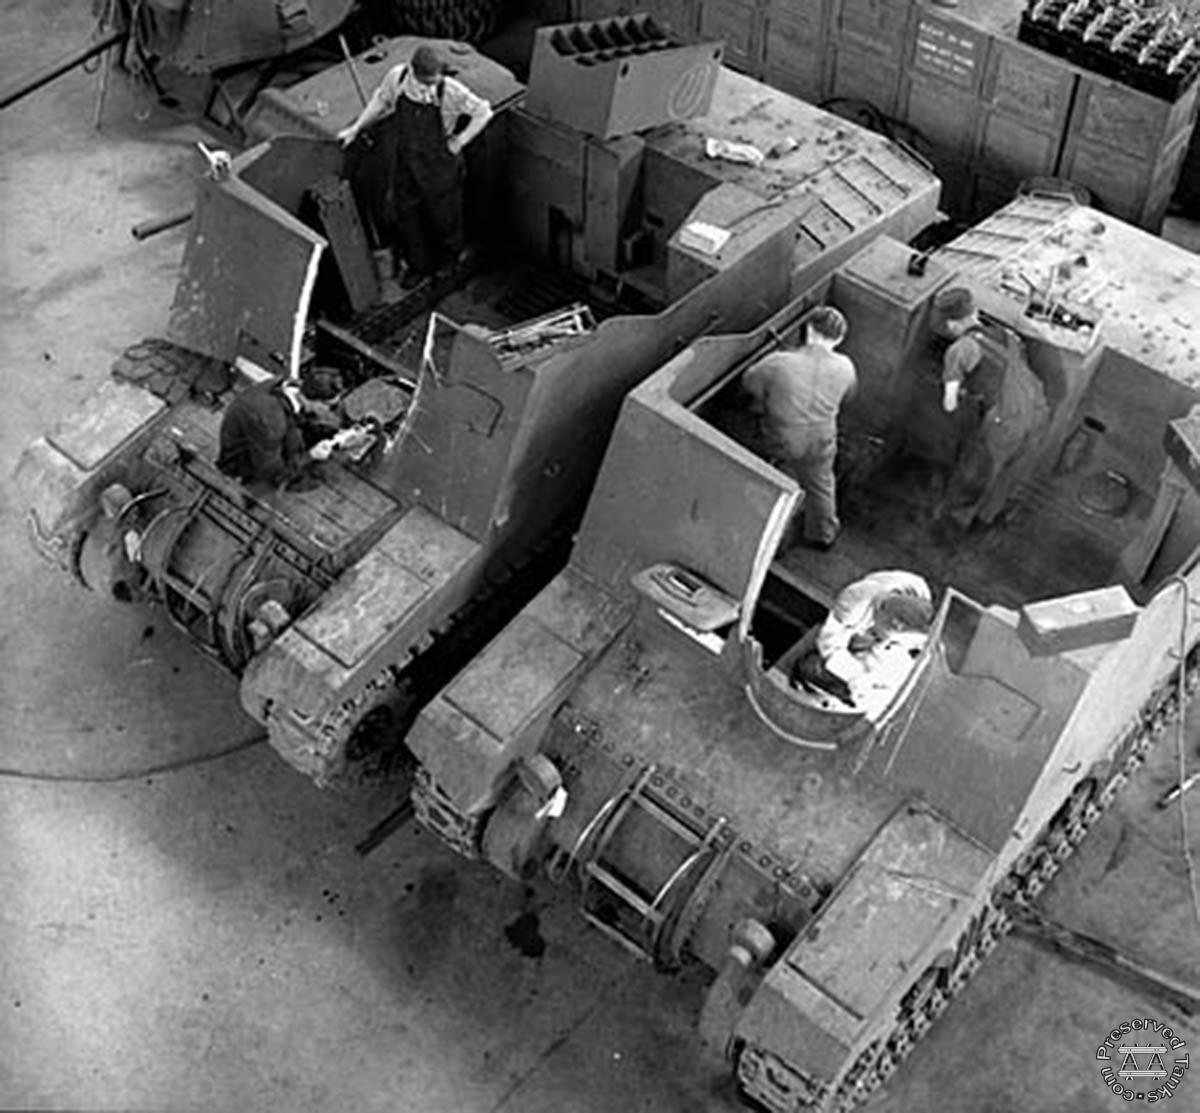 “Workmen put the finishing touches on almost completed Montreal Locomotive tanks assembled at the Montreal Locomotive Works plant” - vehicles are Sexton self-propelled guns